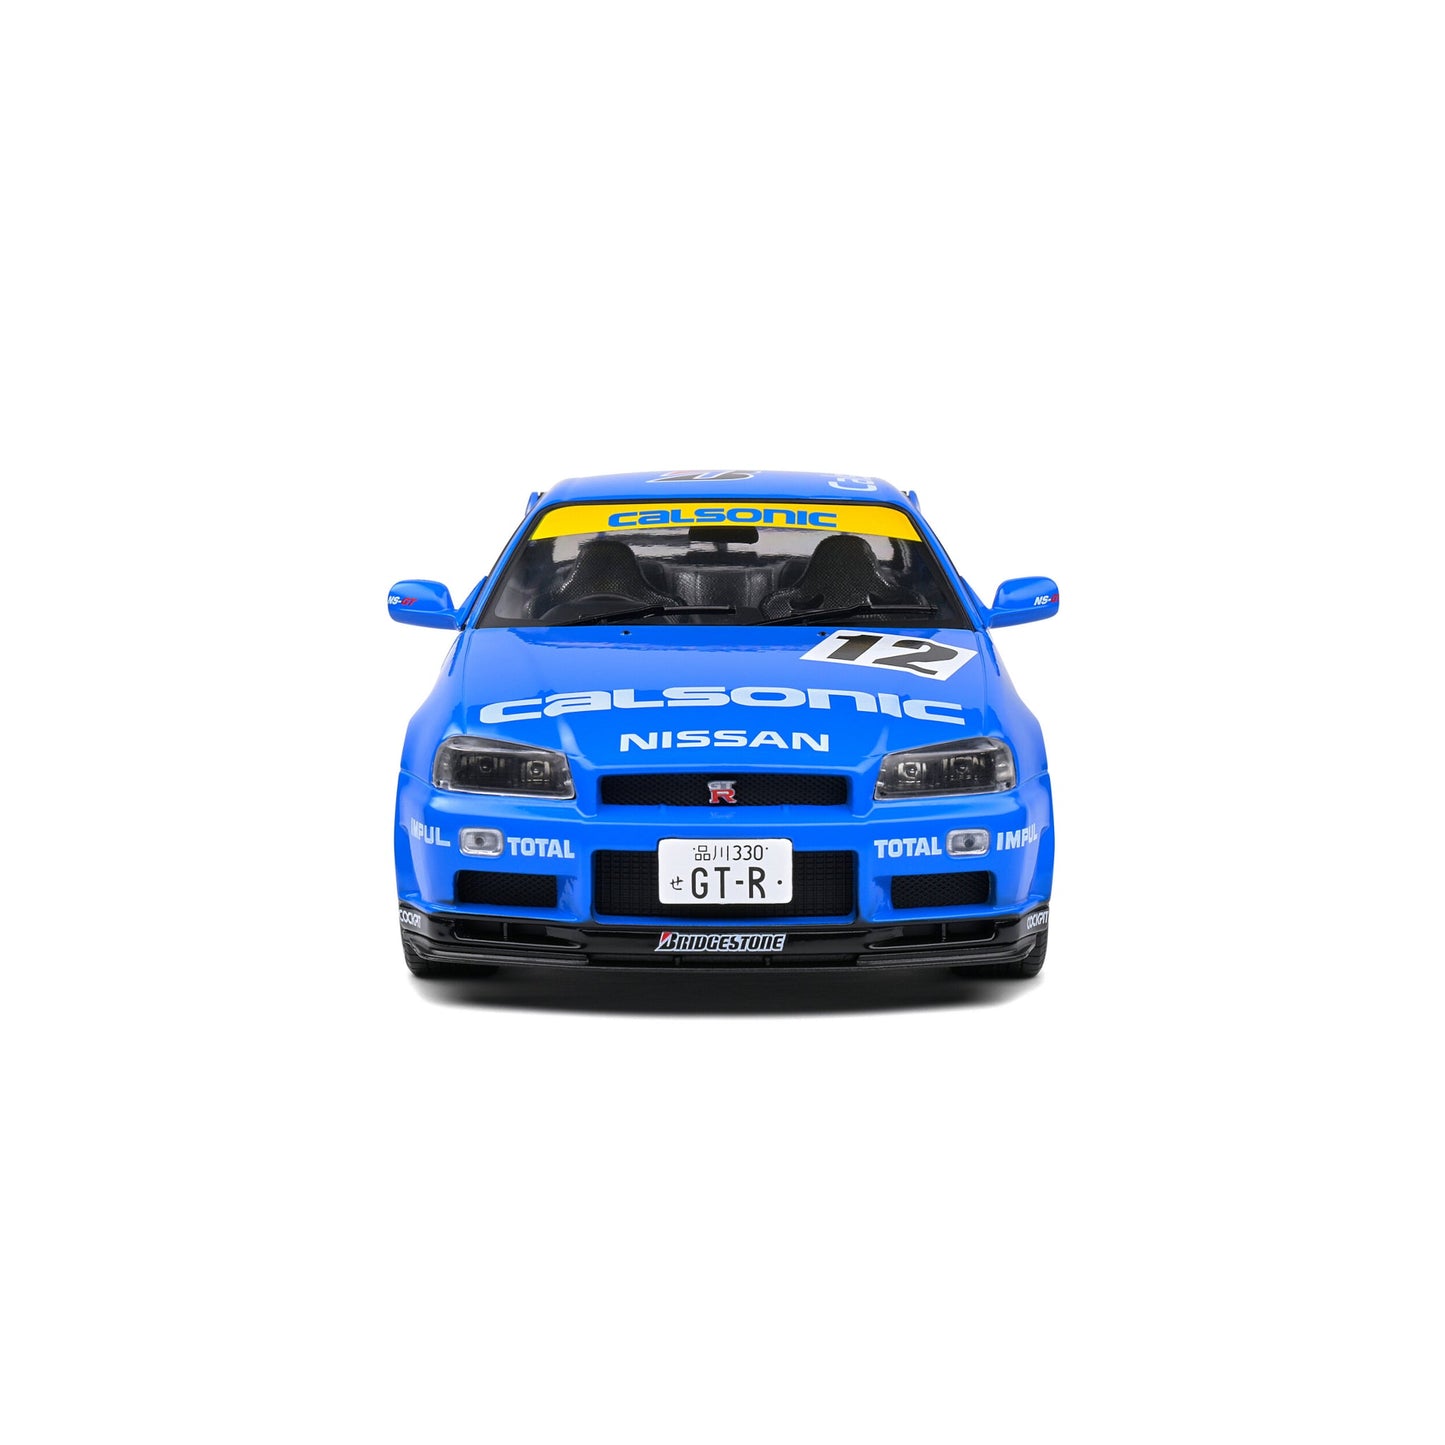 Nissan GT-R R34 #12 Calsonic Bleue Solido 1/18 - S1804307